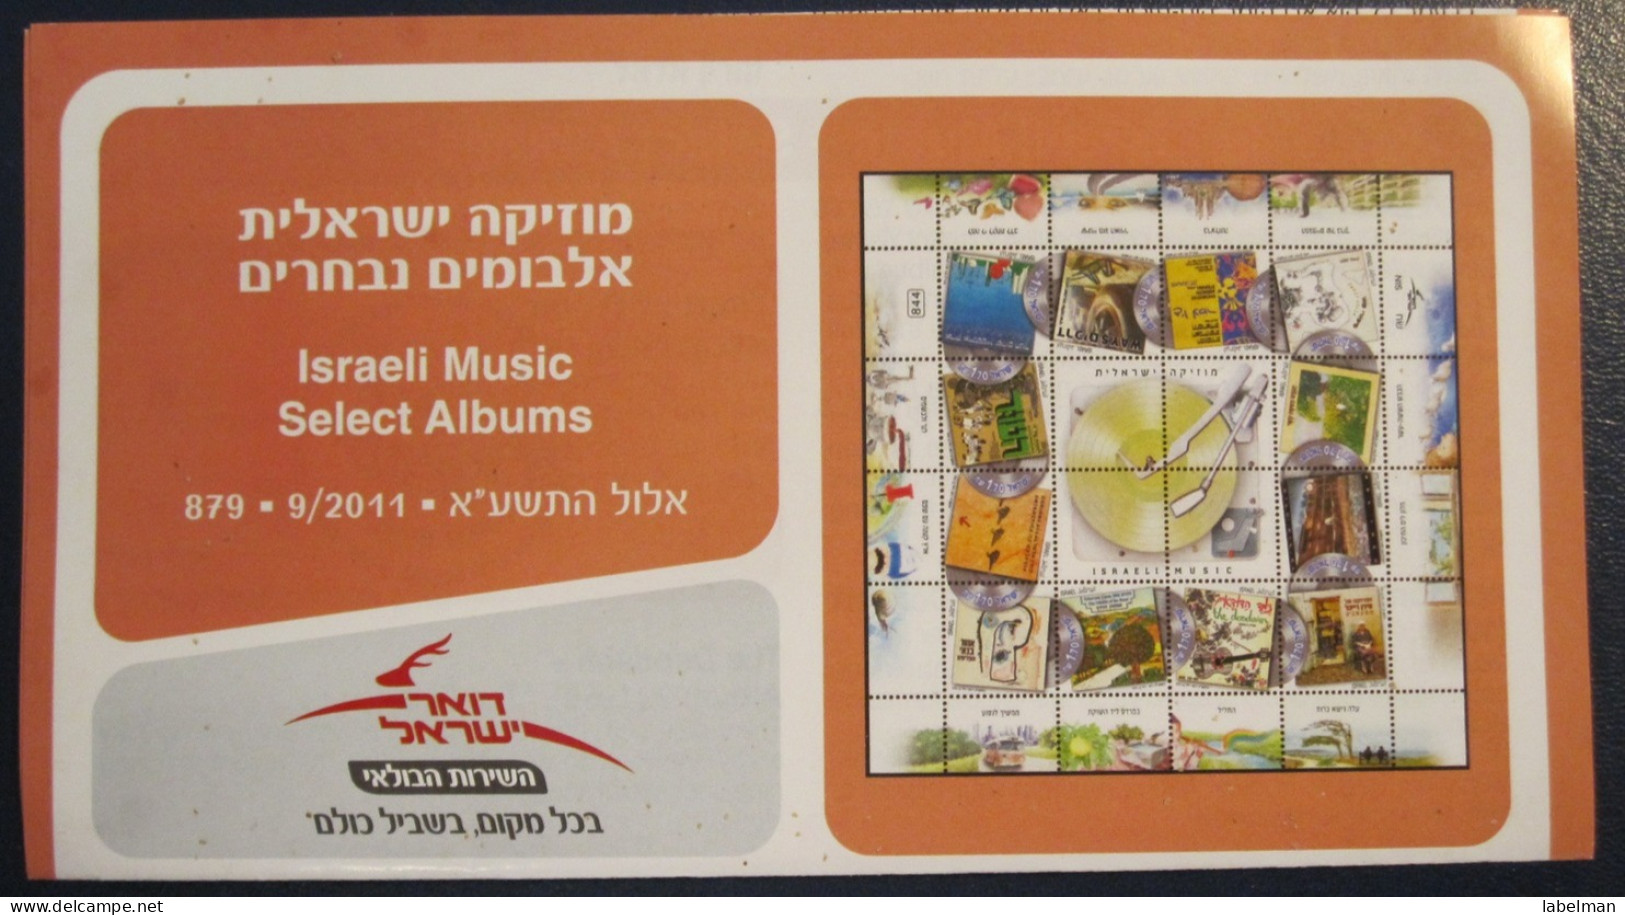 ISRAEL STAMP FIRST DAY ISSUE BOOKLET 2011 MUSIC HOLY LAND POSTAL HISTORY AIRMAIL JERUSALEM TEL AVIV POST JUDAICA - Covers & Documents